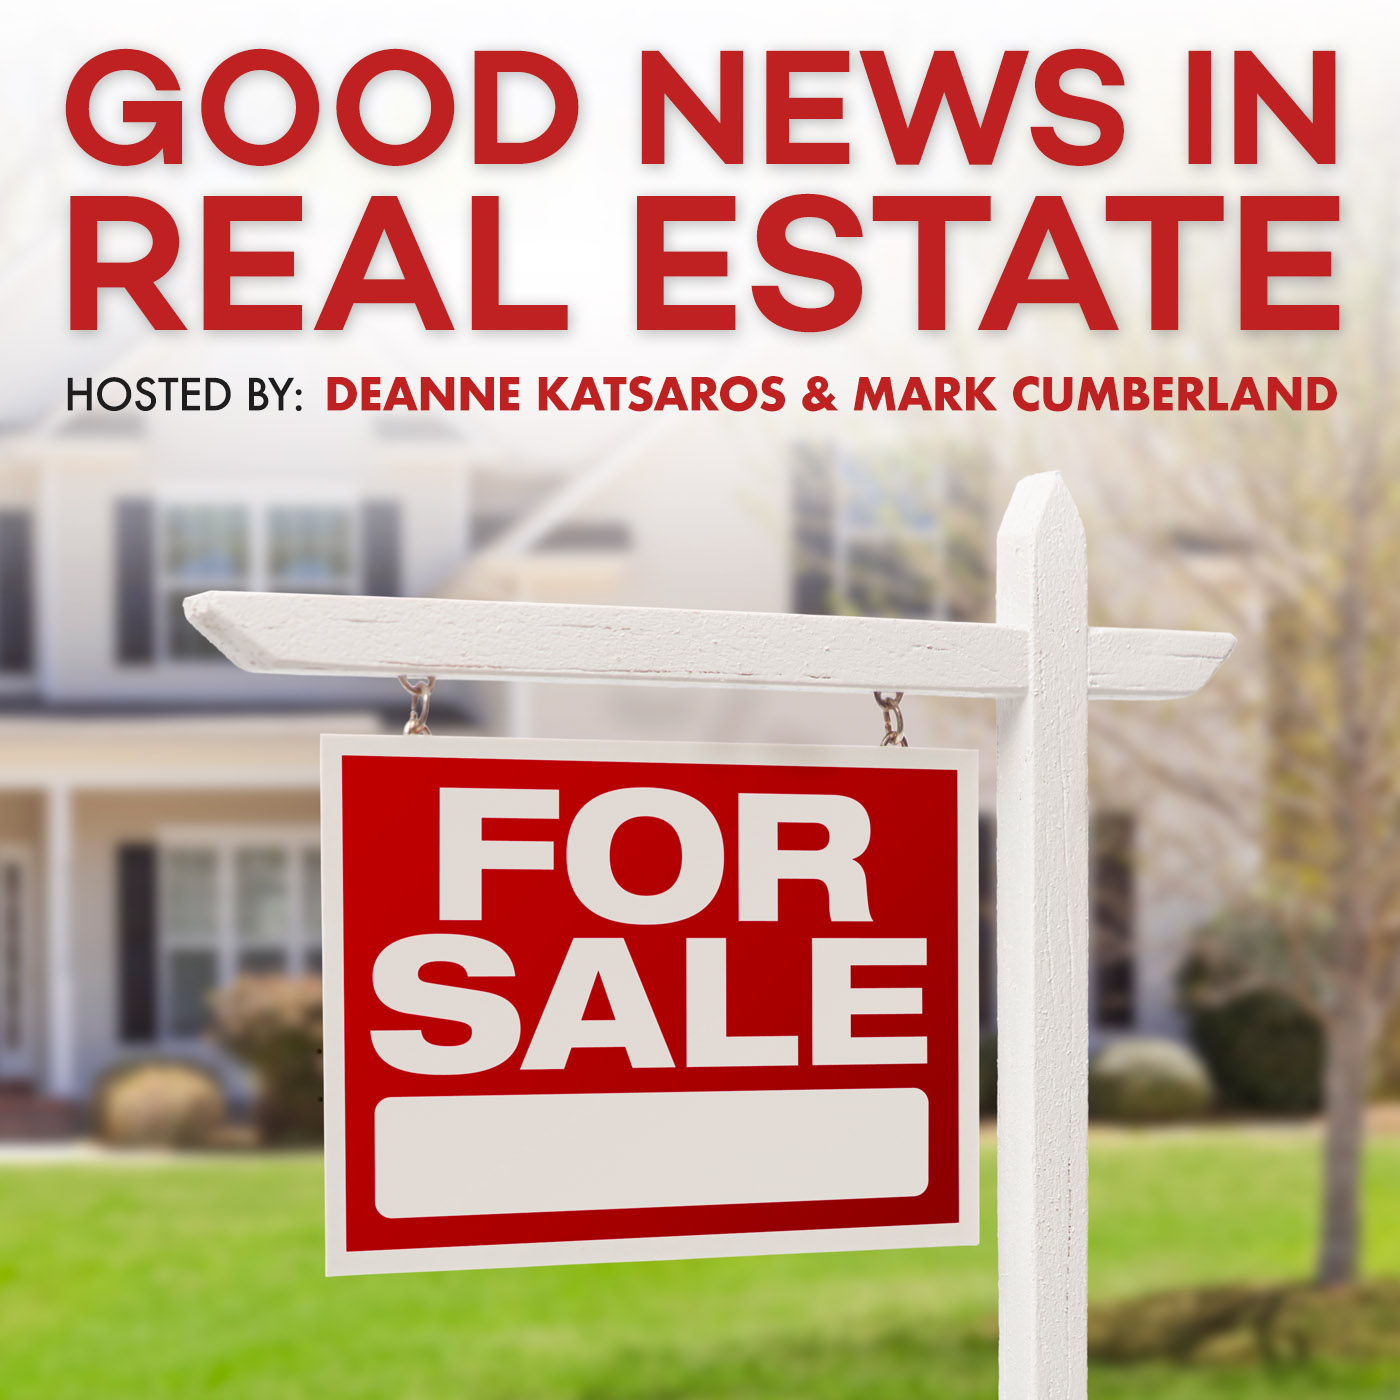 August 23, 2020 | Good News In Real Estate